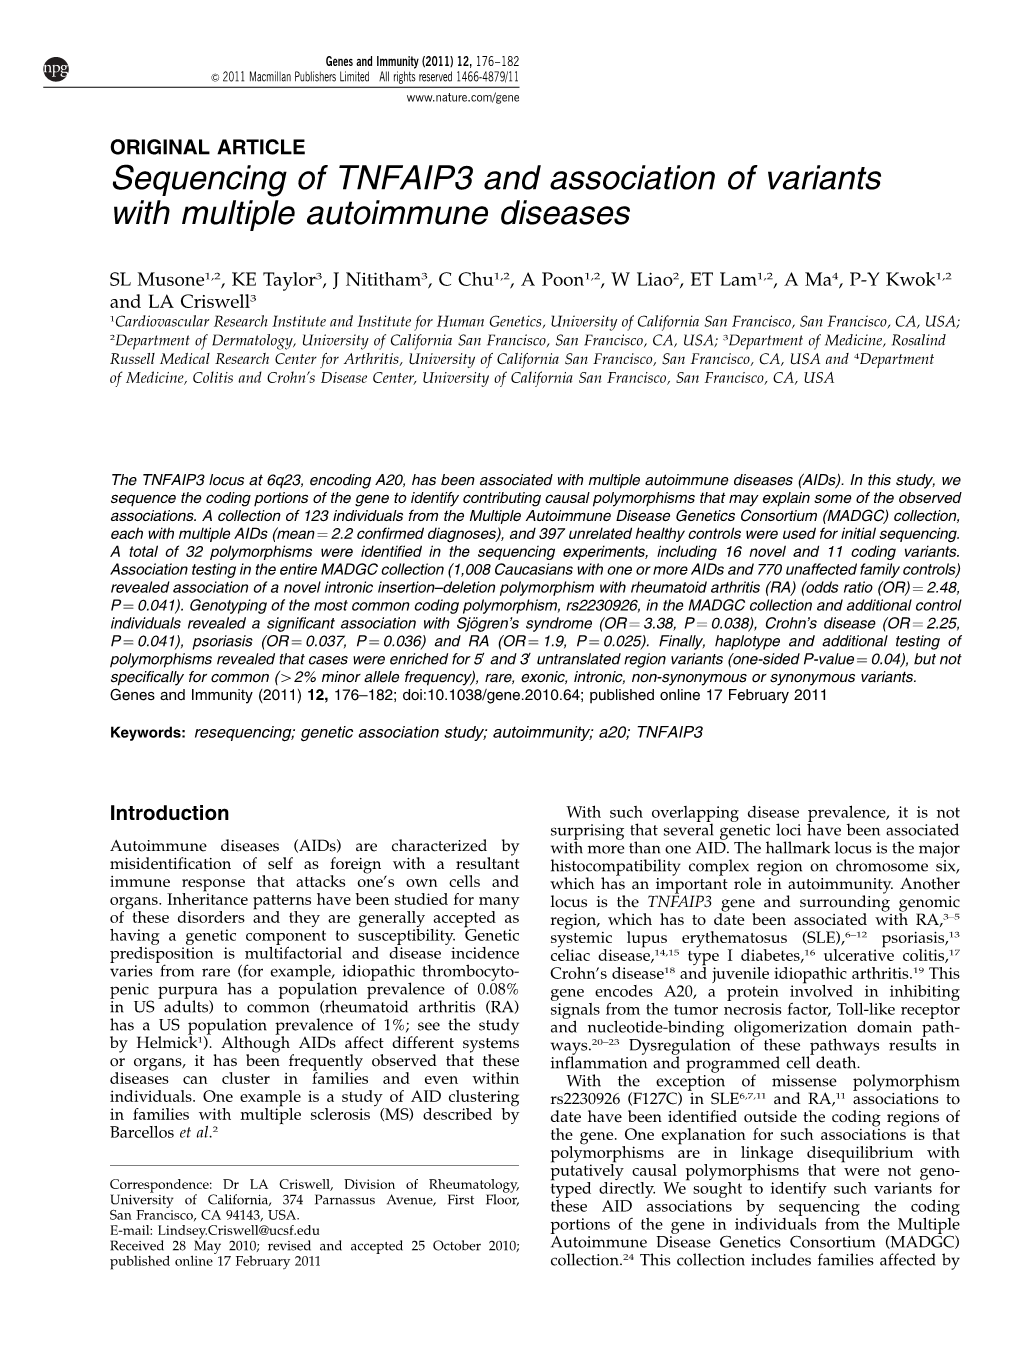 Sequencing of TNFAIP3 and Association of Variants with Multiple Autoimmune Diseases